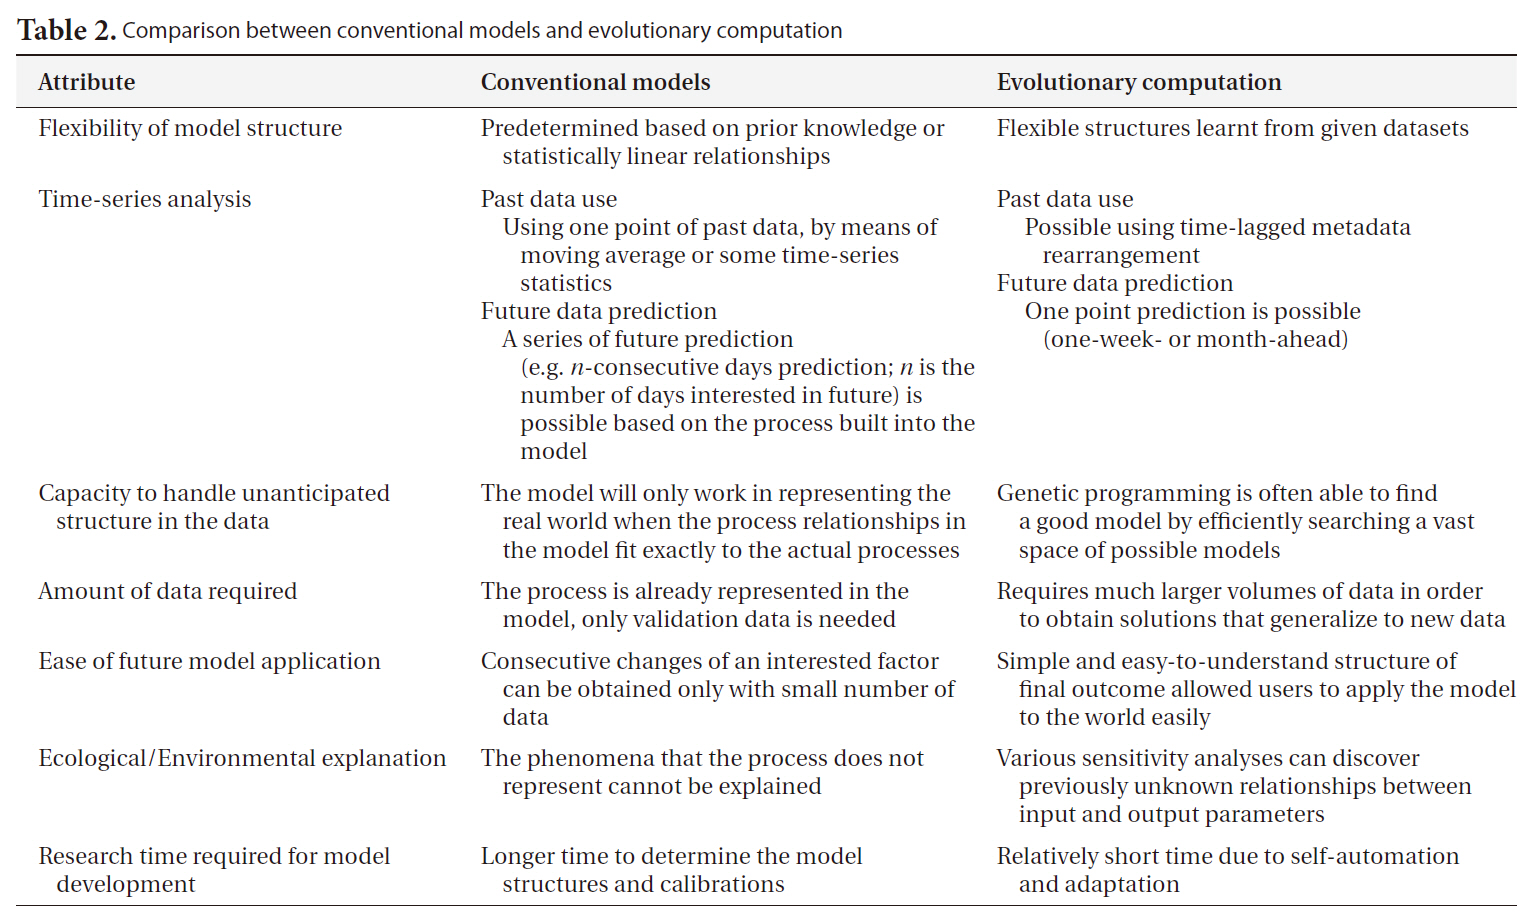 Comparison between conventional models and evolutionary computation